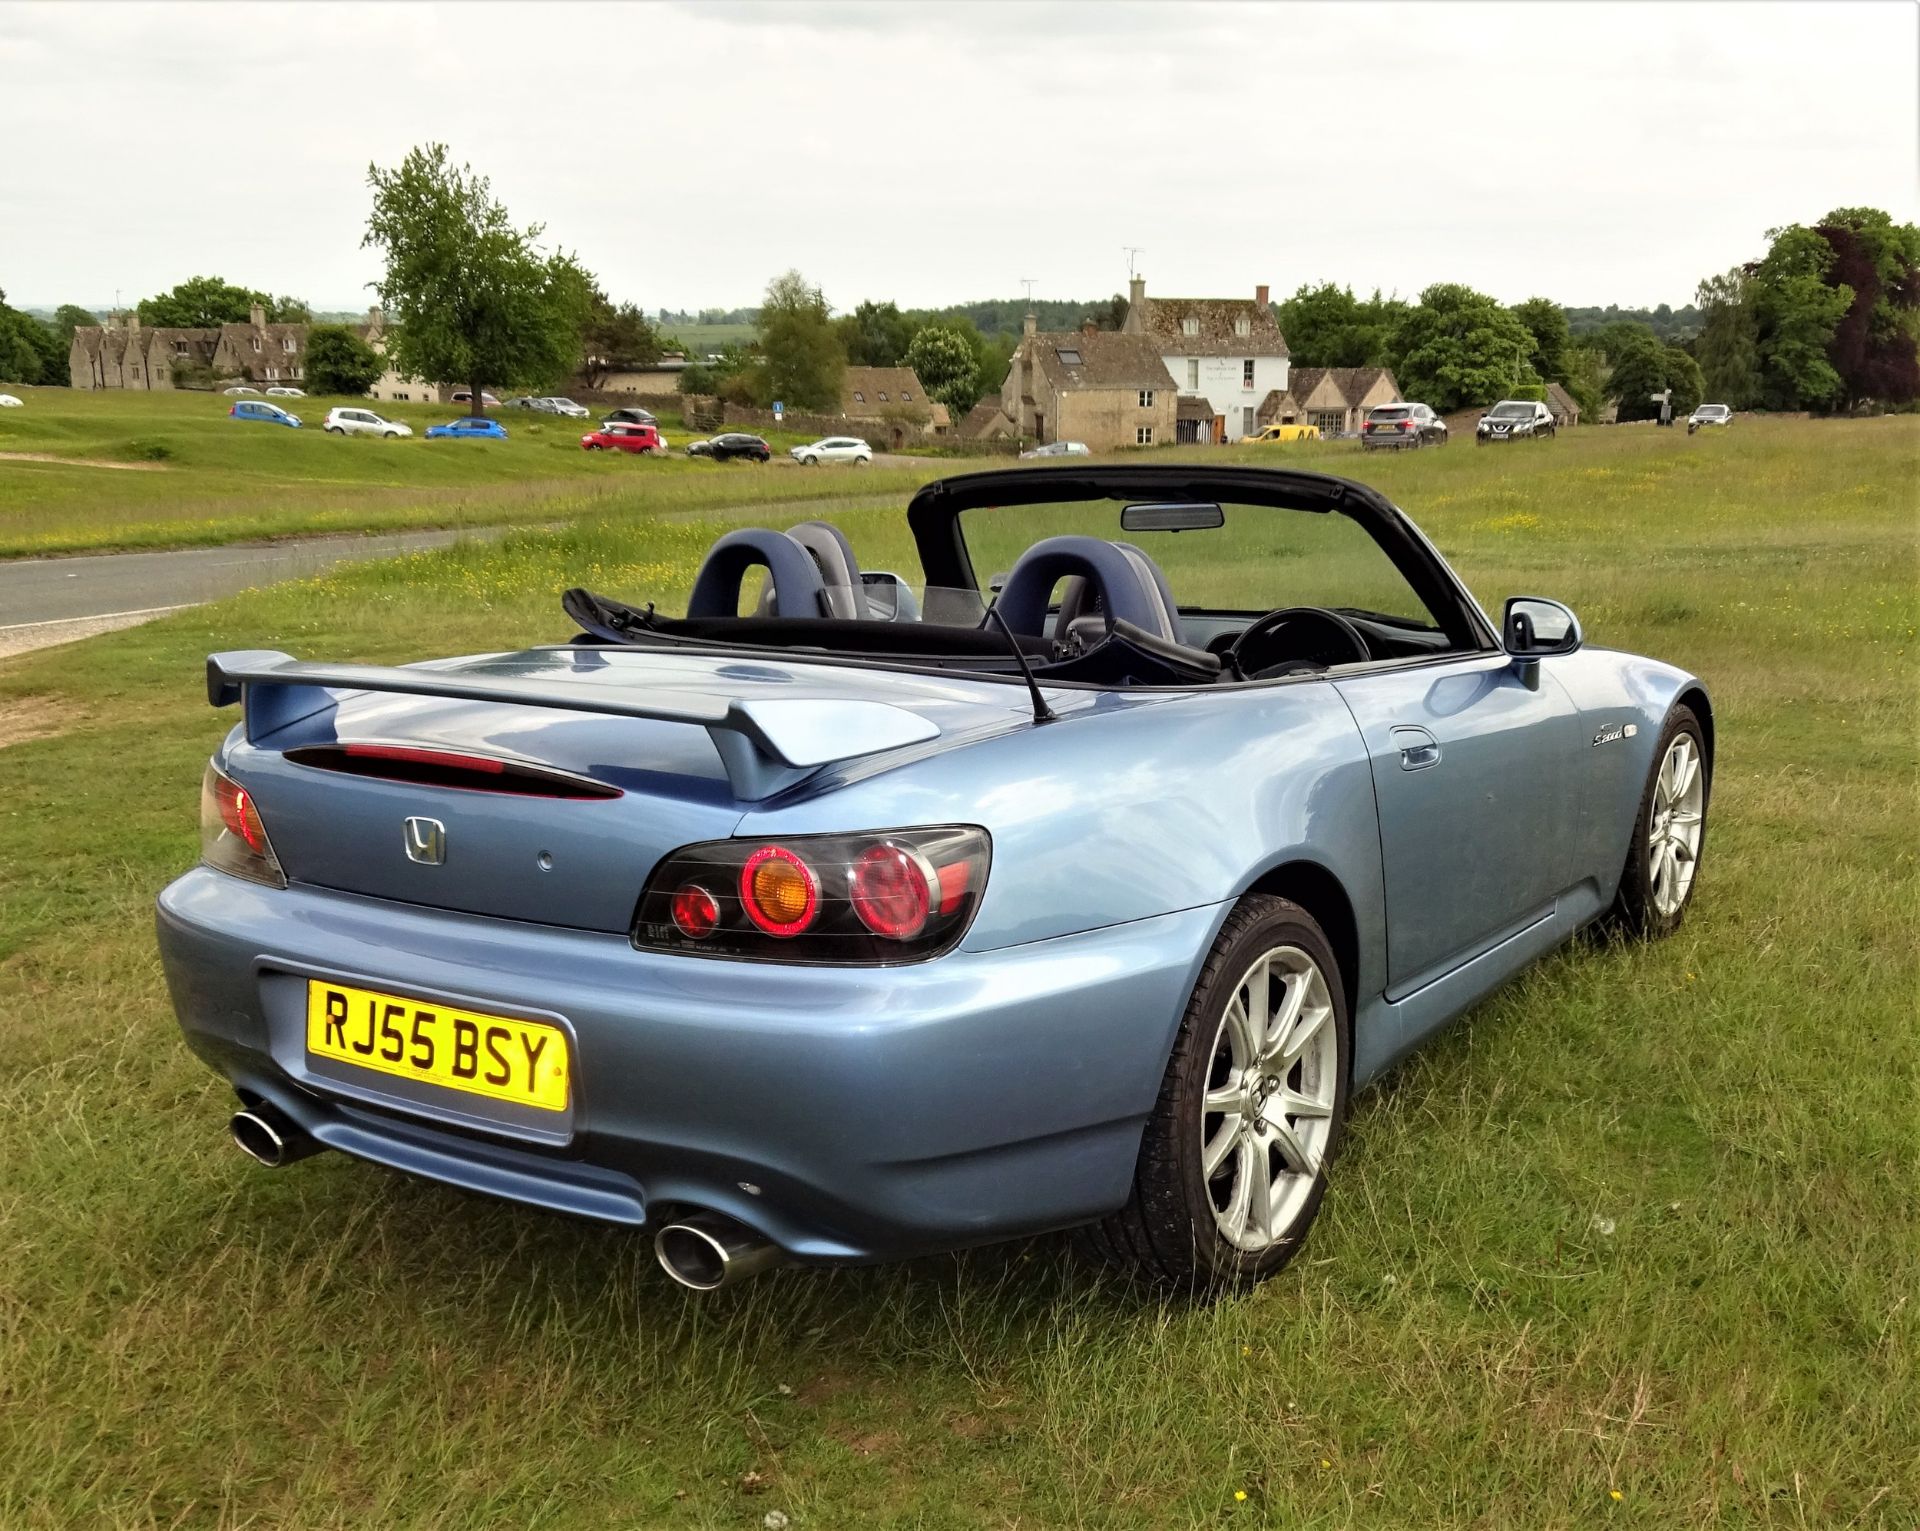 2005 HONDA S2000 Registration Number: RJ55 BSY Chassis Number: JHMPA11305S202028 - In current - Bild 2 aus 15